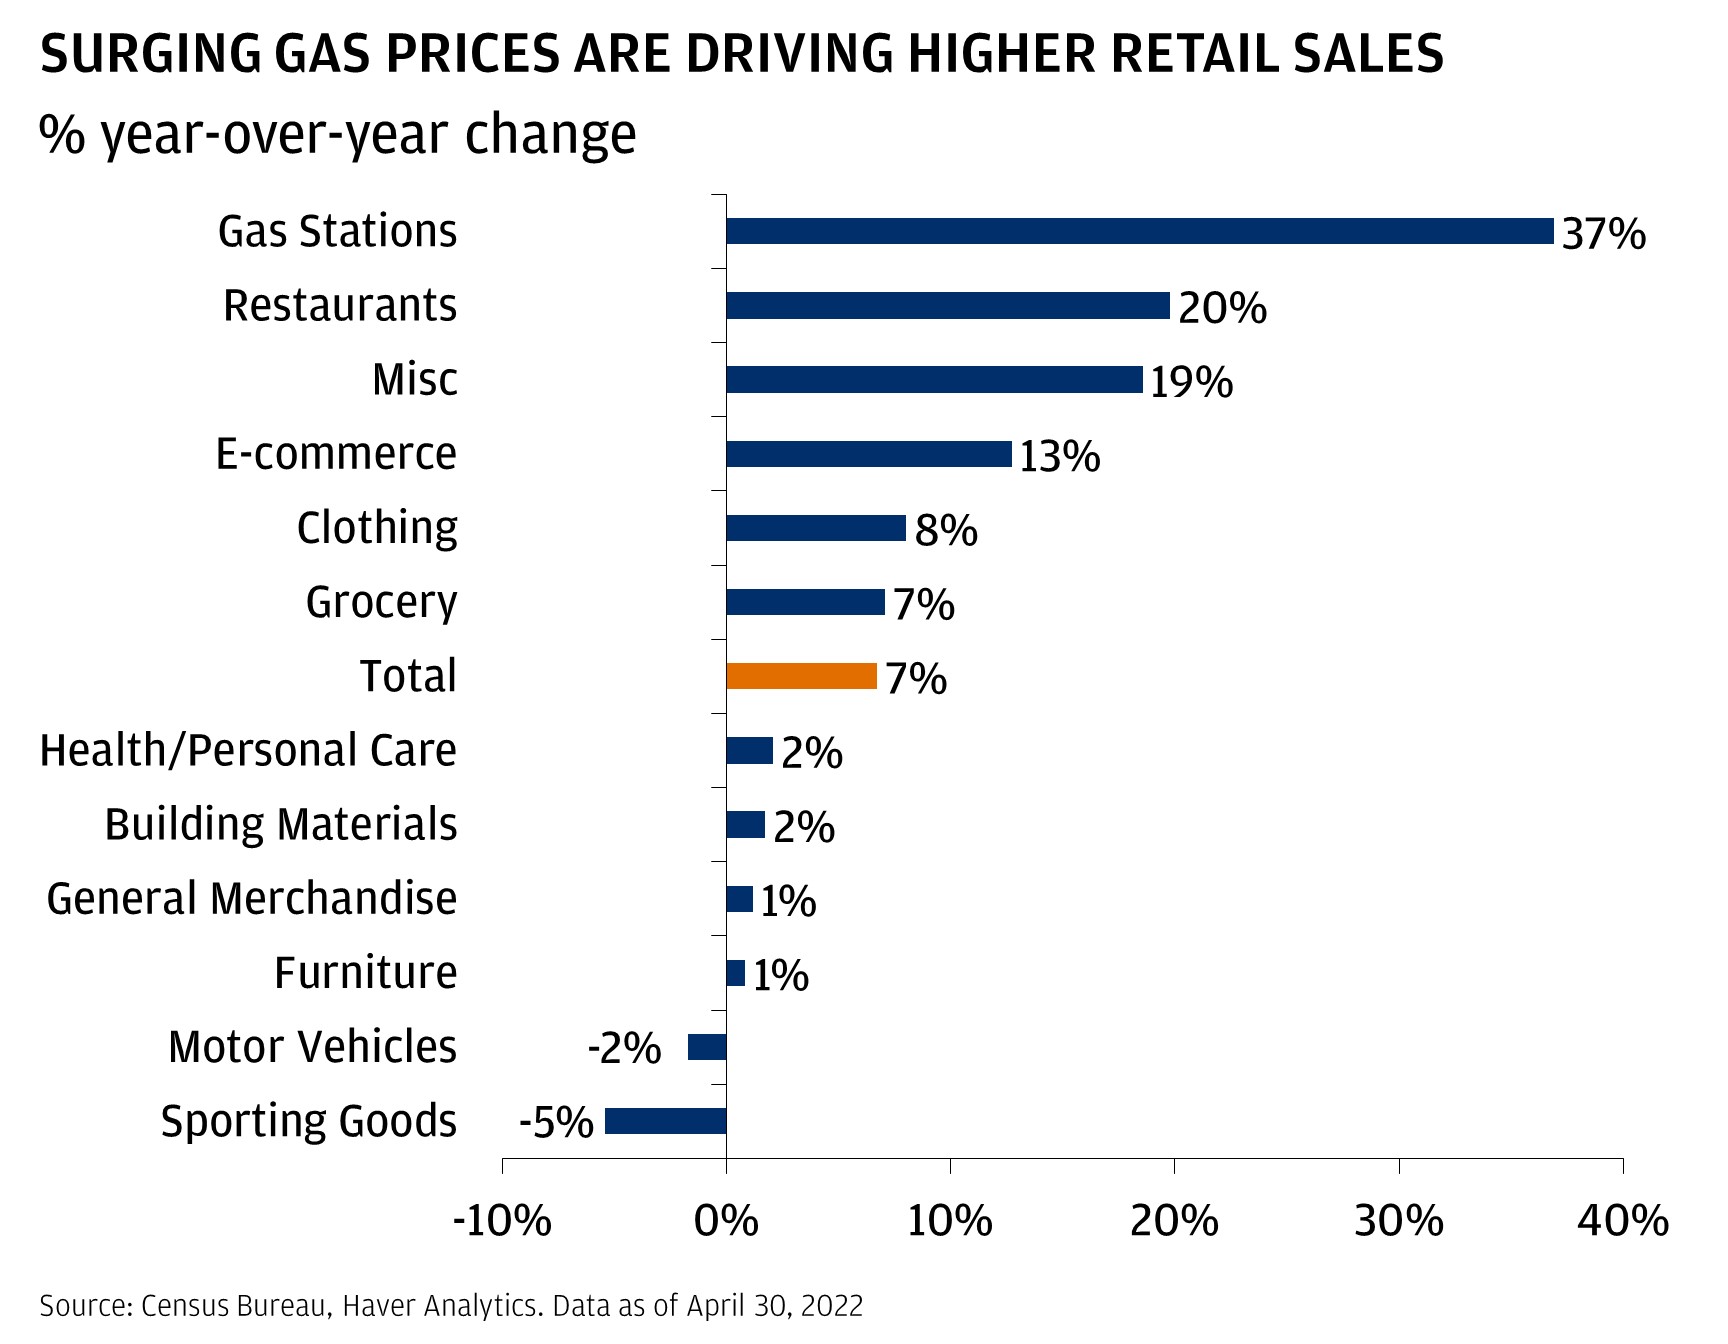 This chart shows the year-over-year percentage change of retail sales